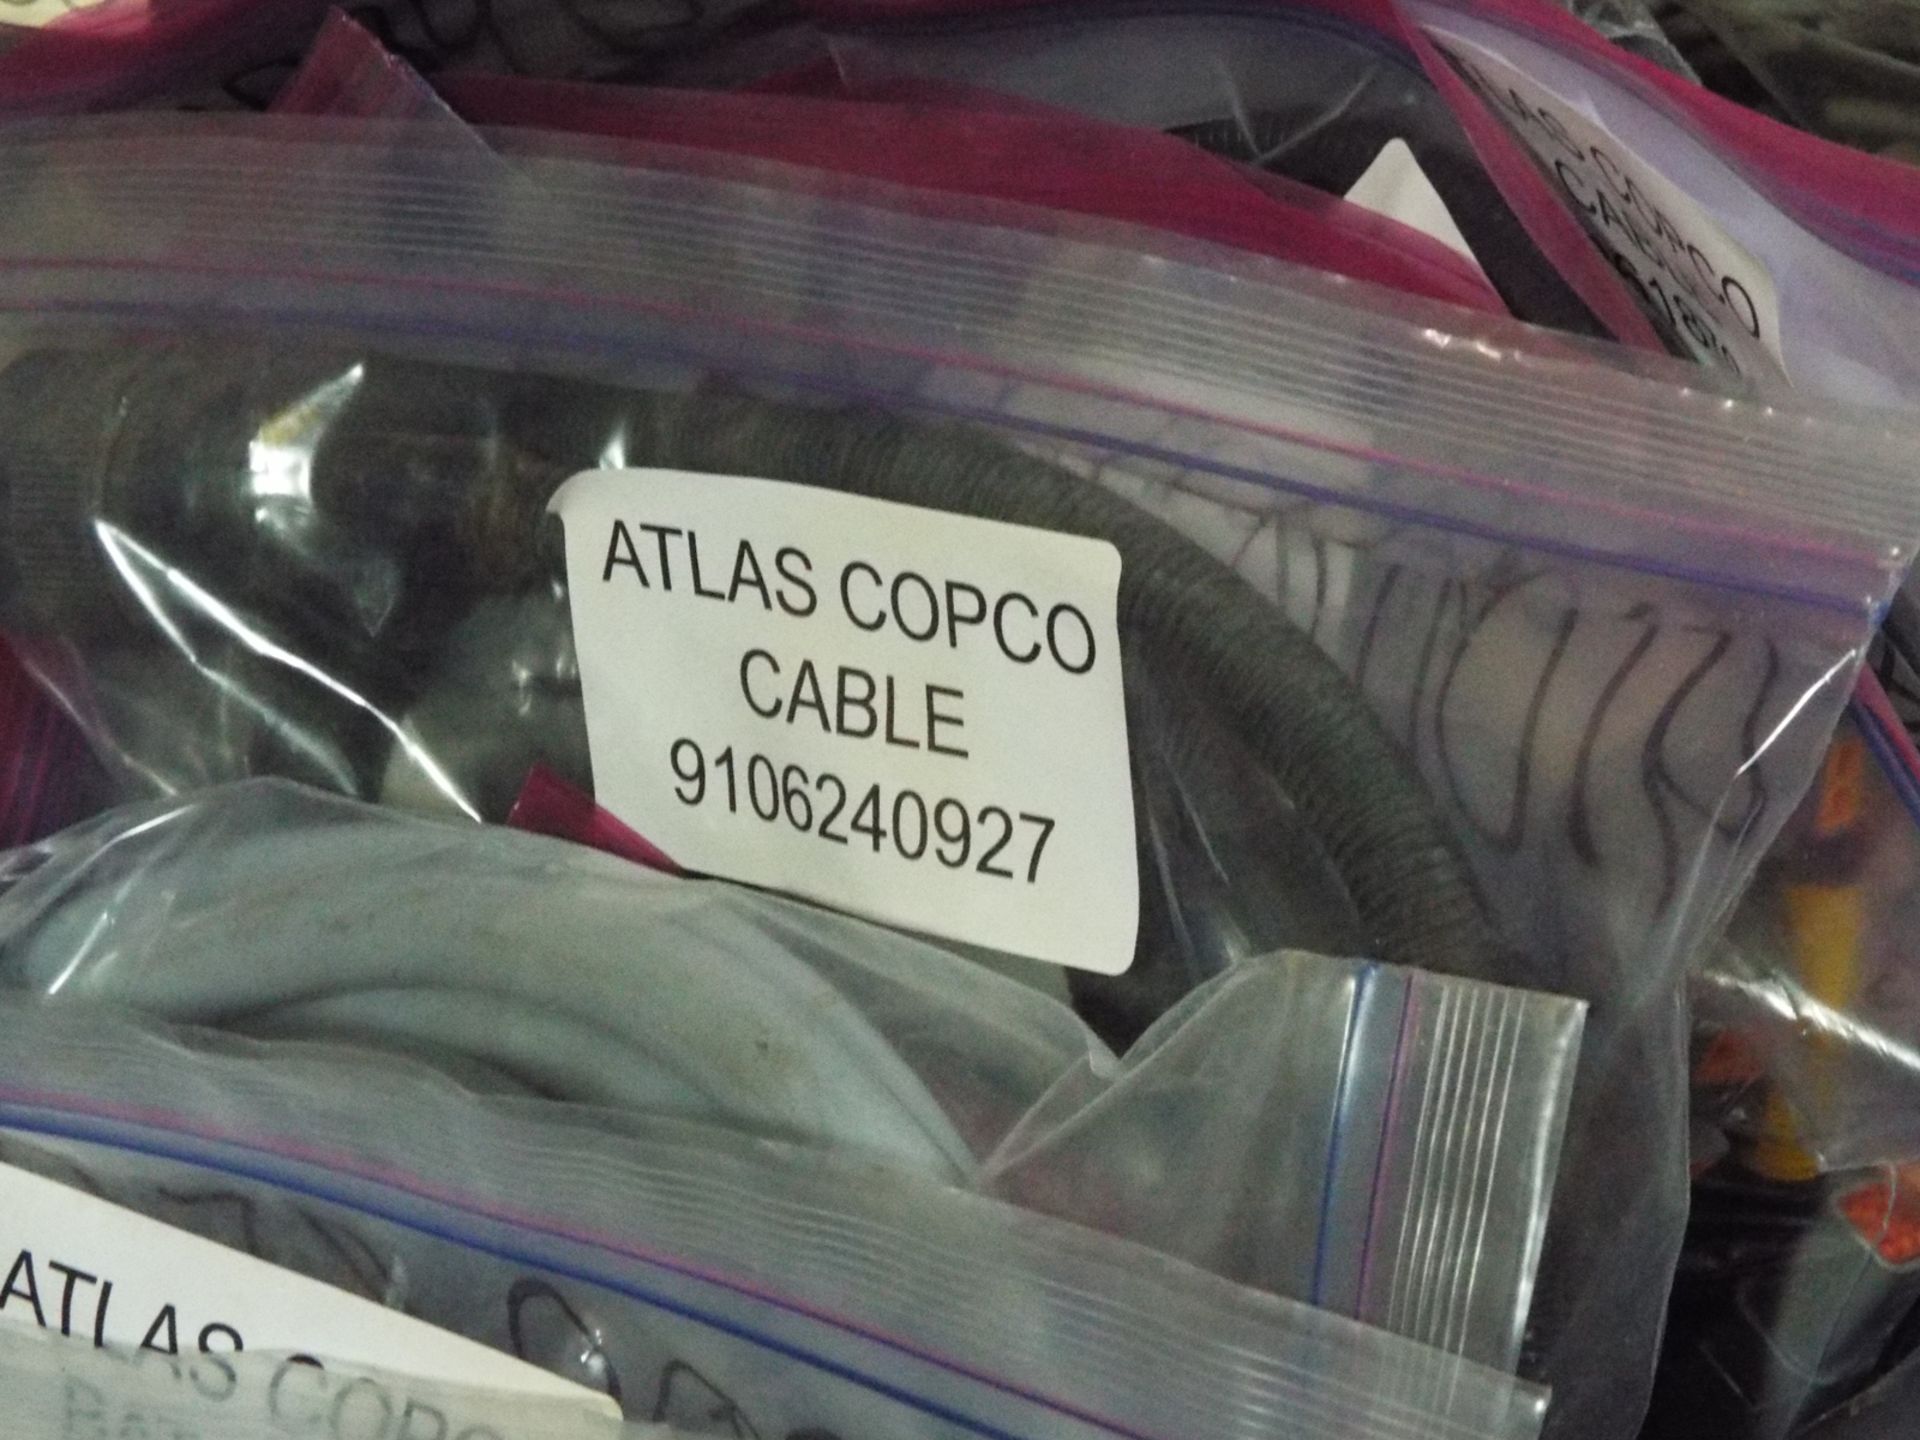 LOT/ ATLAS COPCO PARTS INCLUDING BUSHING STEEL, CONE, BAT CABLE, AND OTHER CABLES/HARNESSES - Image 11 of 16